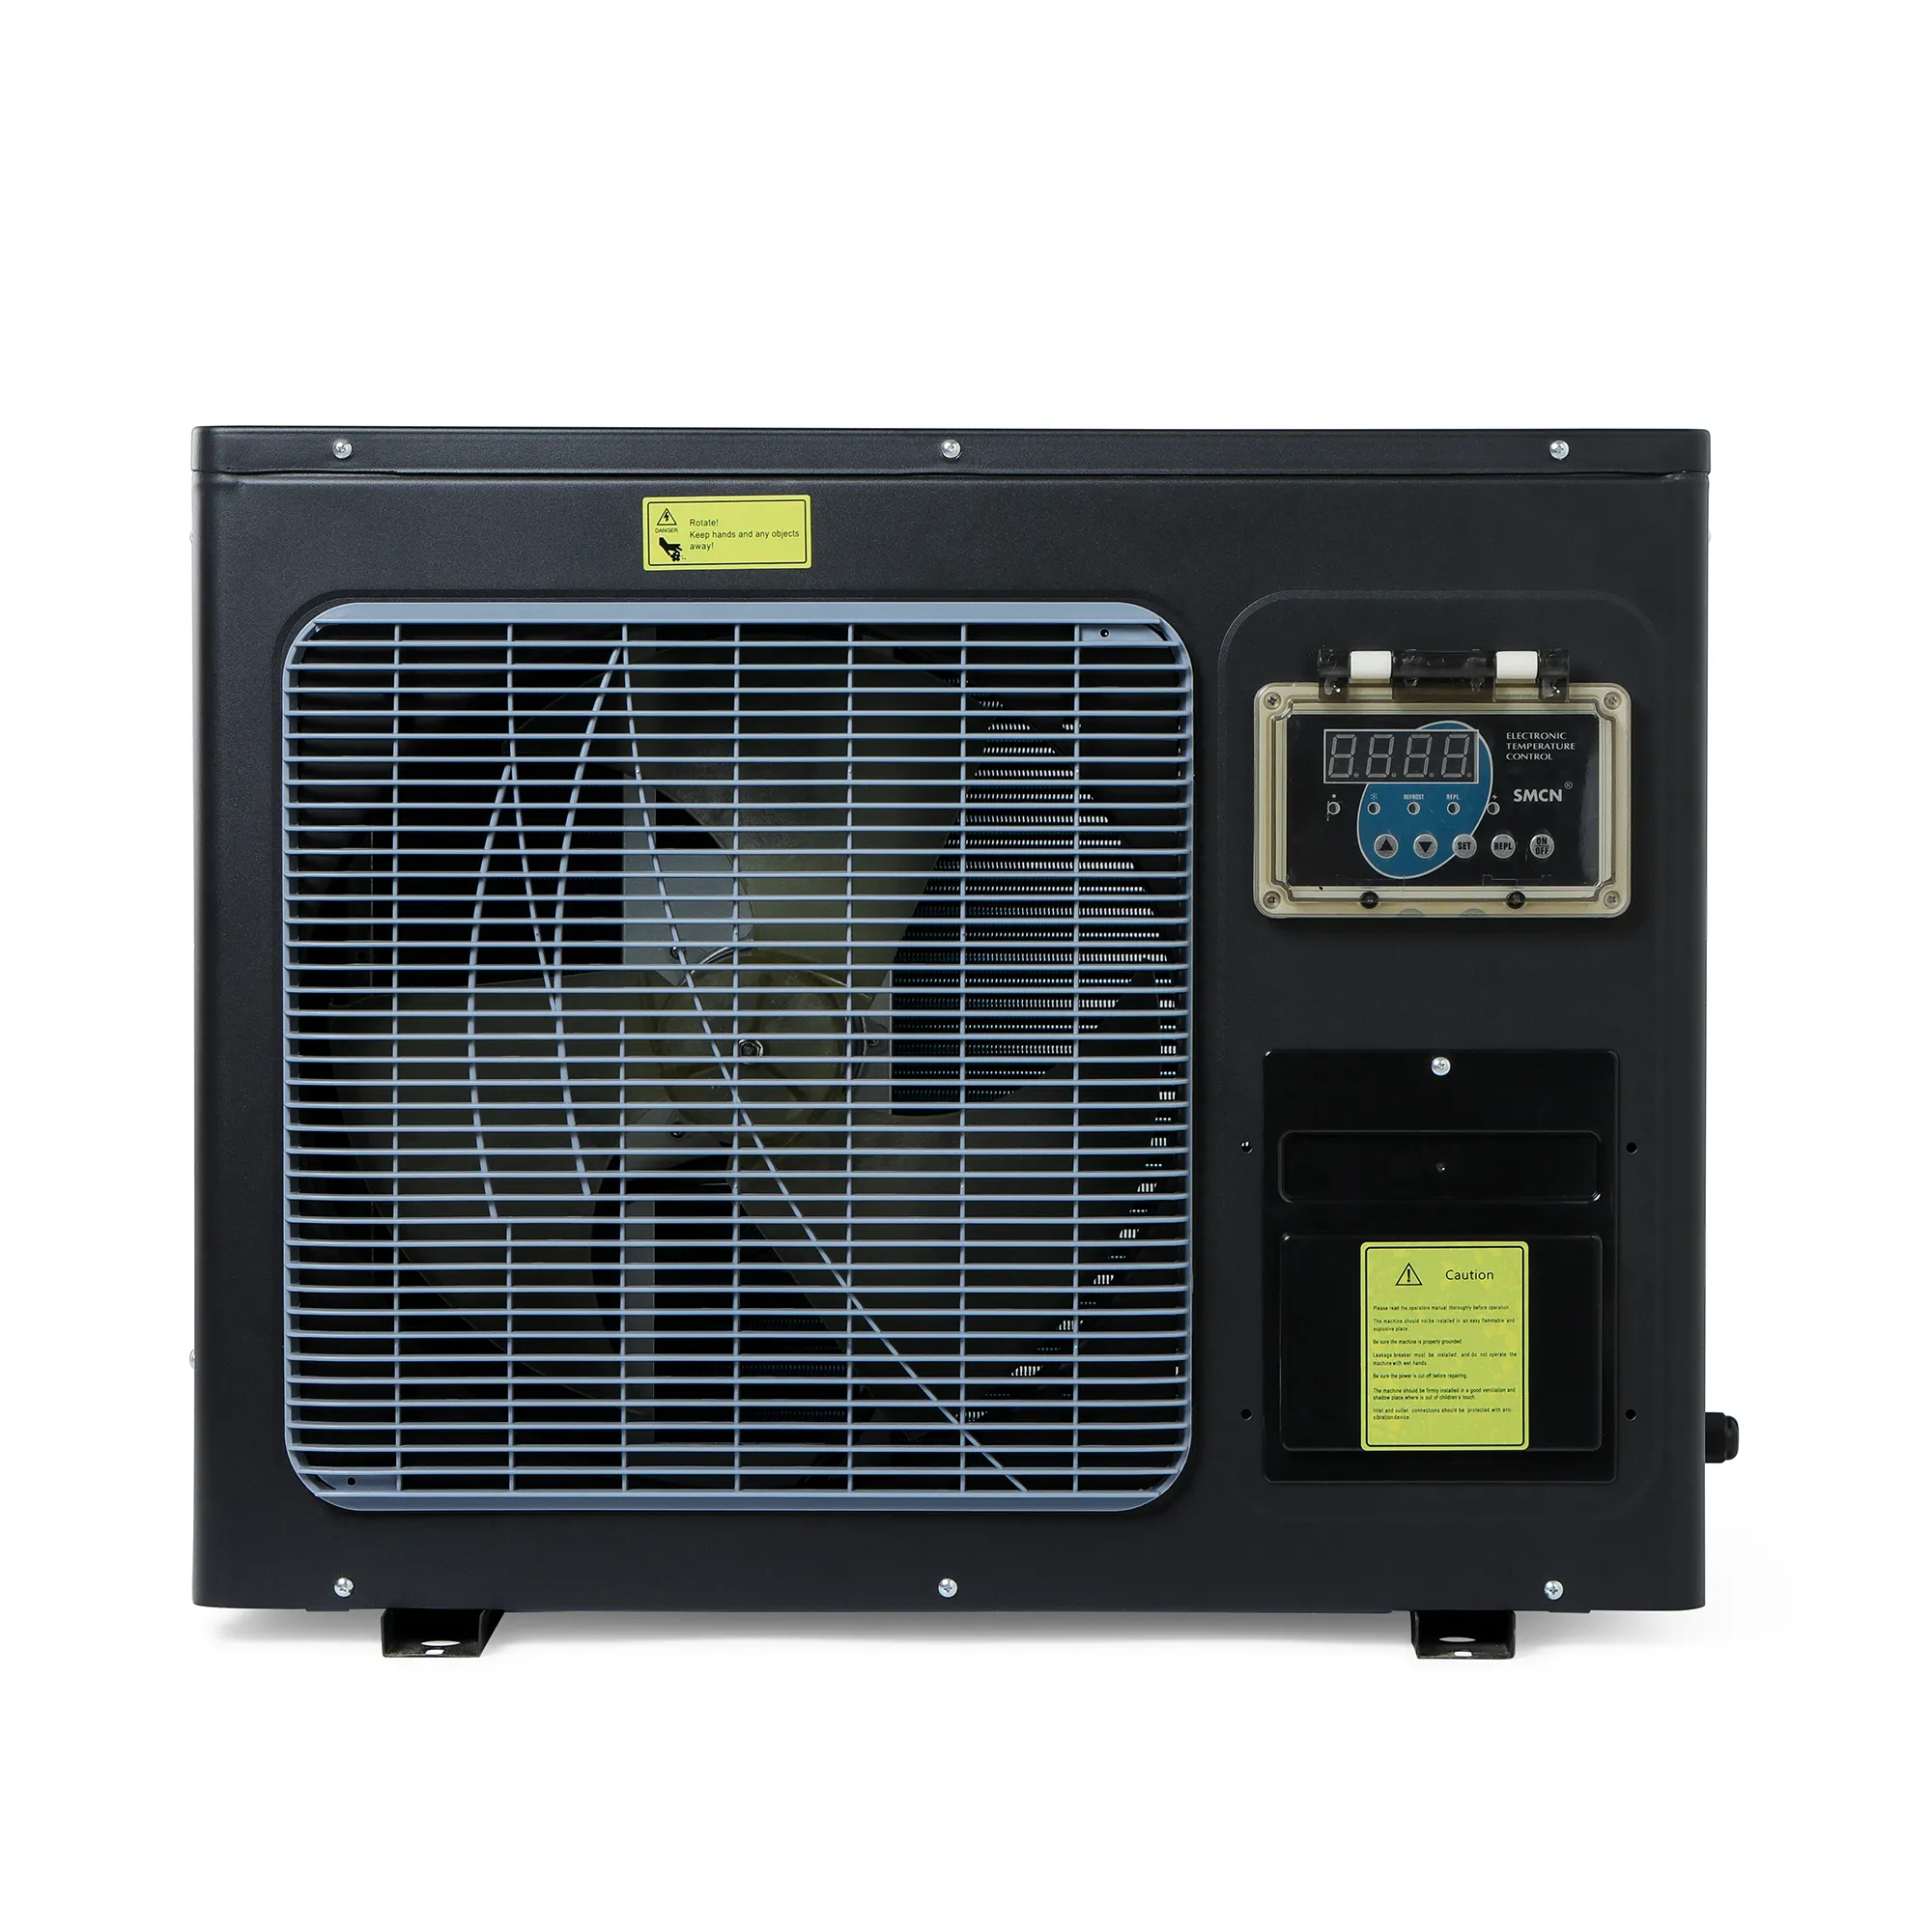 B2000 water chiller for ice bath cold plunge milk and fish tank